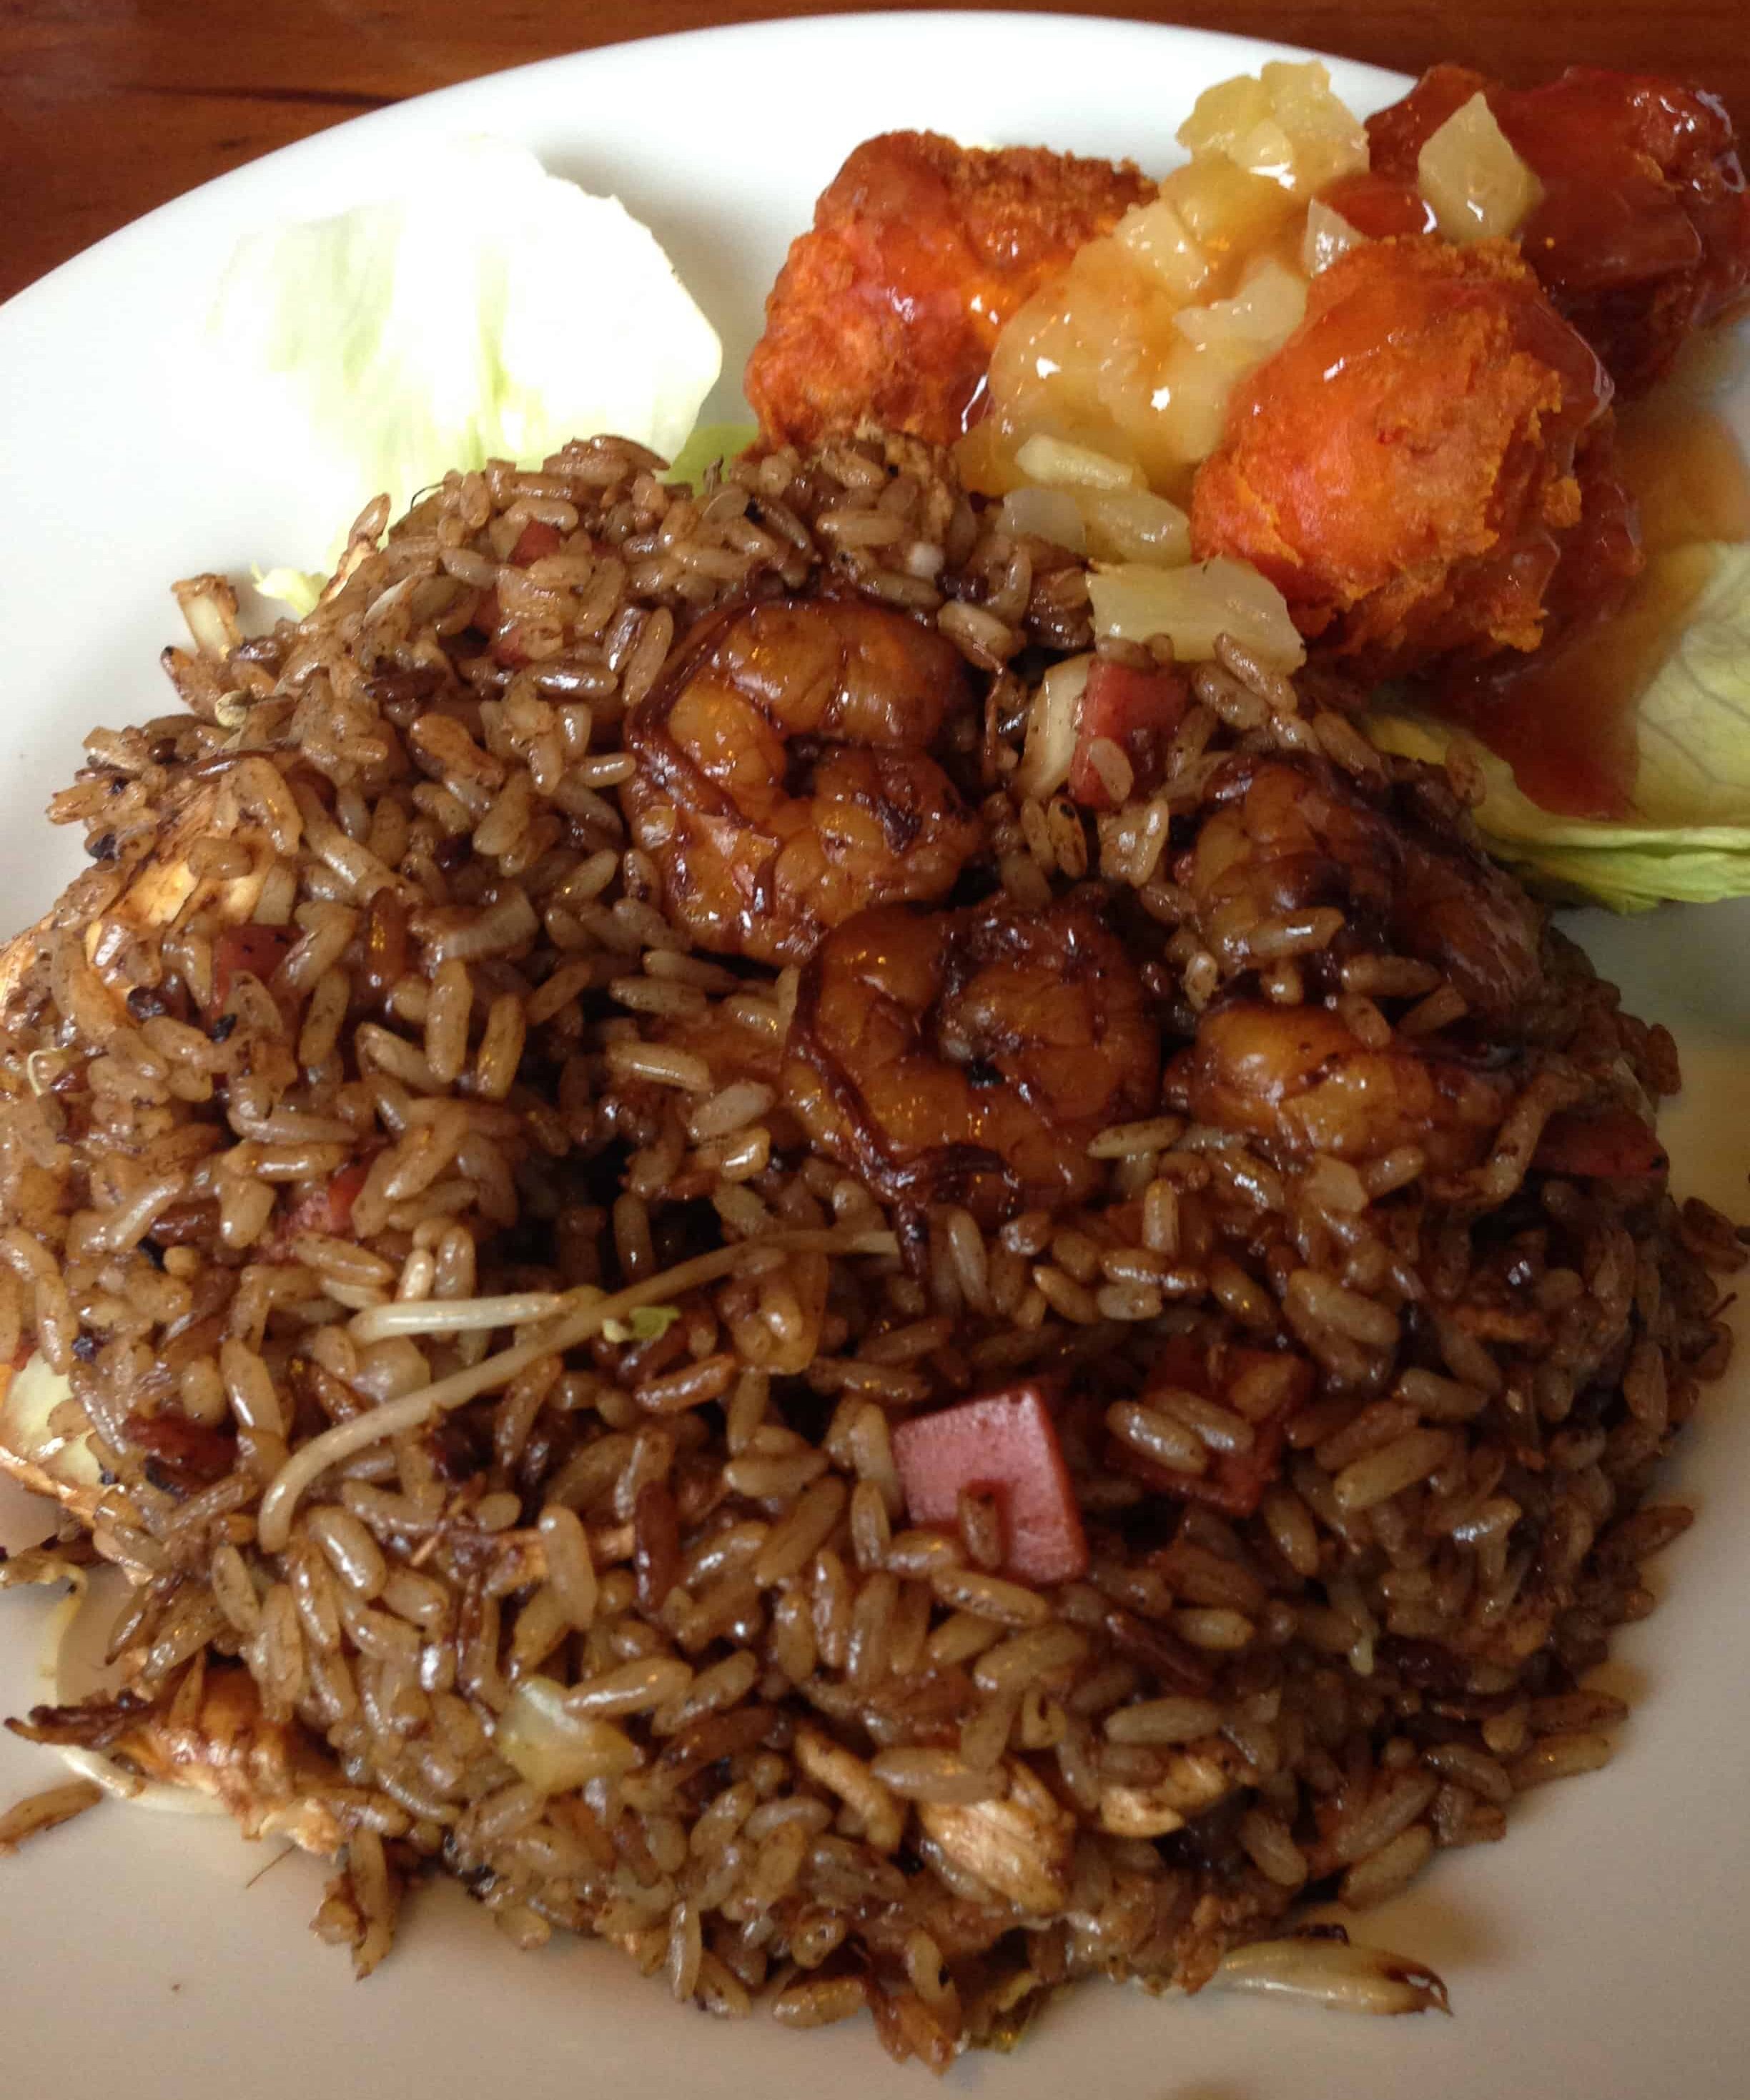 Fried rice at Horchata in Belén de Umbría, Risaralda, Colombia